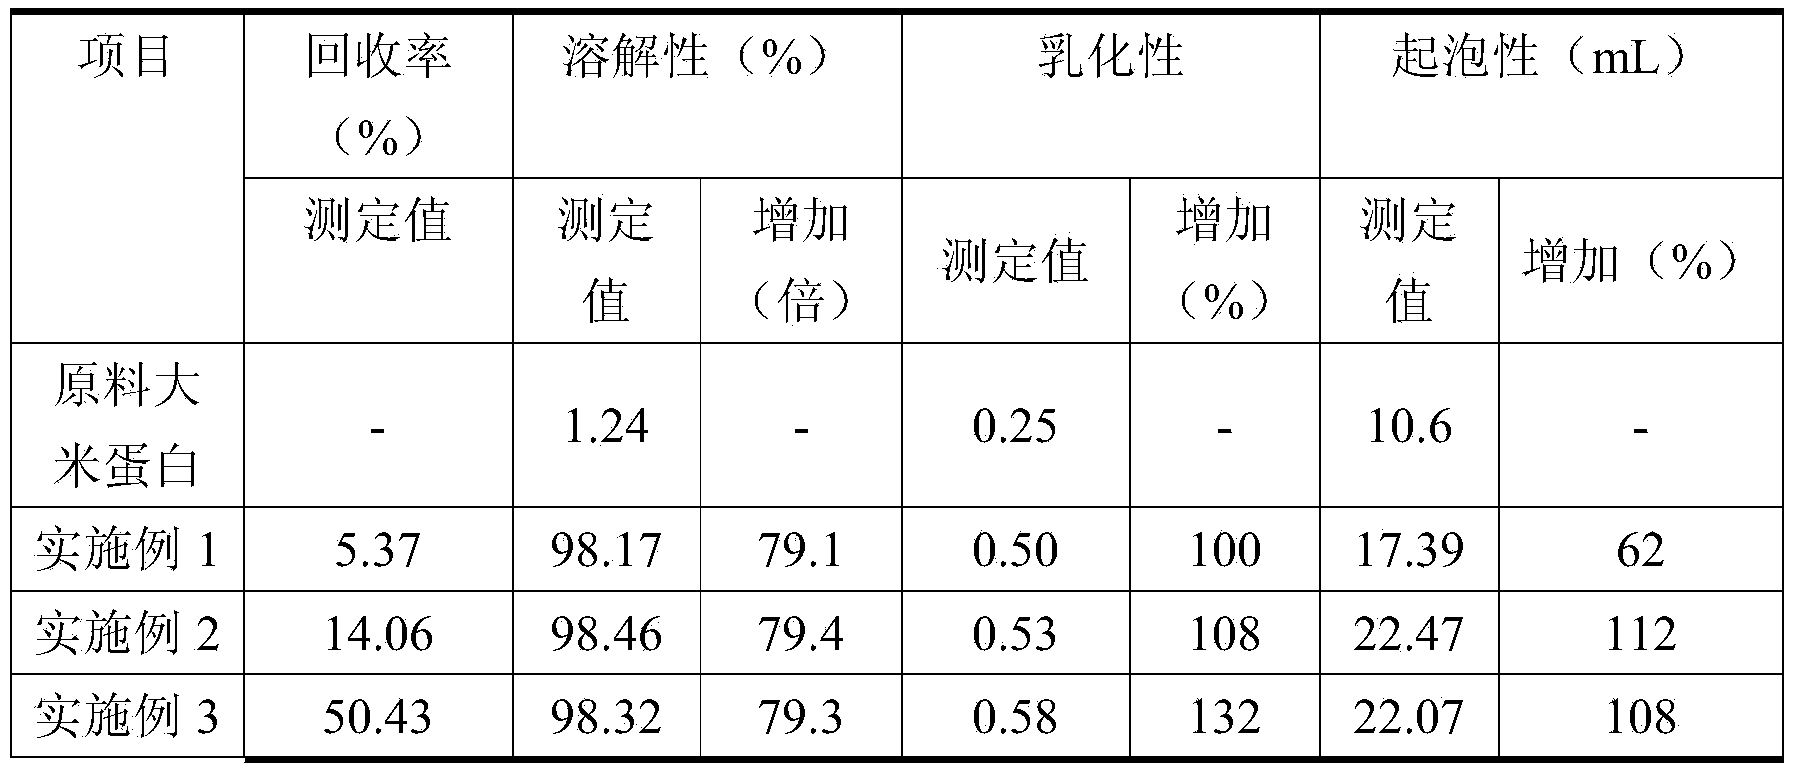 Physical modification preparation method of high-solubility rice protein